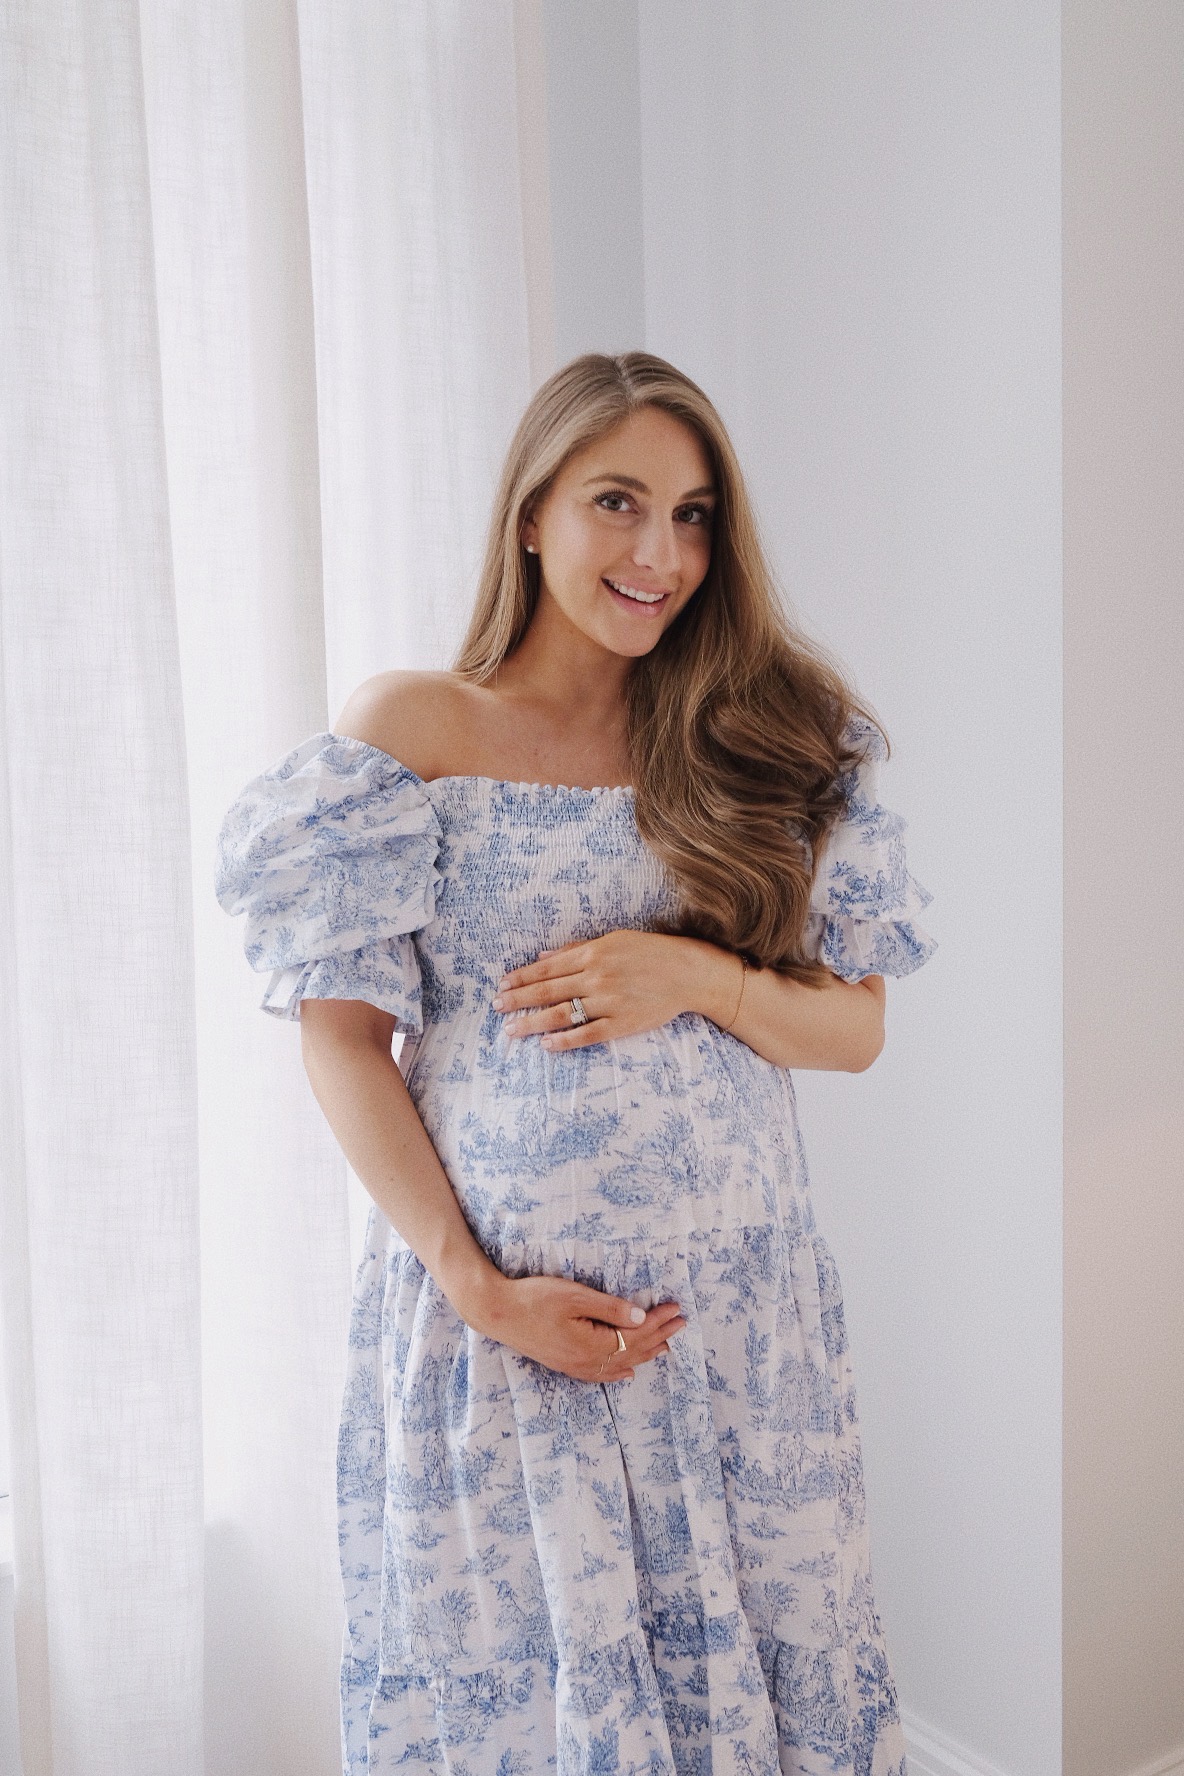 Nothing Fits But Pregnancy Dress | Miss Madeline Rose